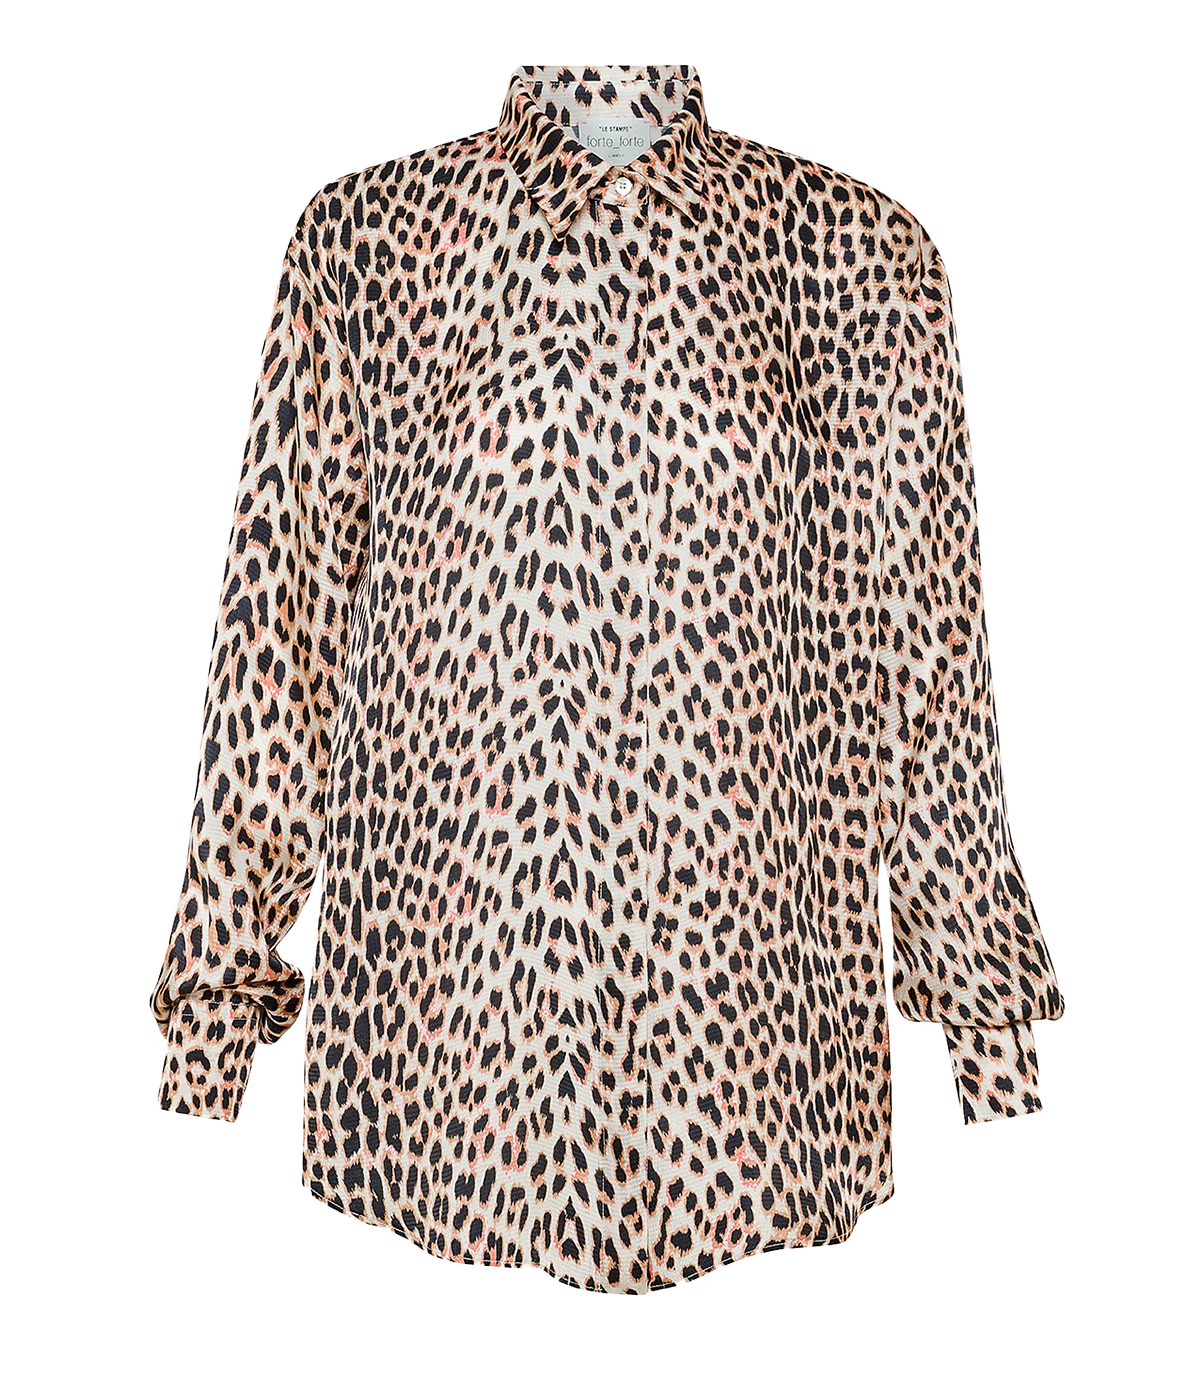 A classic elevated basic shirt, with long cuffed sleeves and leopard print. Throw on and go, bra friendly, 100% viscose, made internationally, bra friendly. 